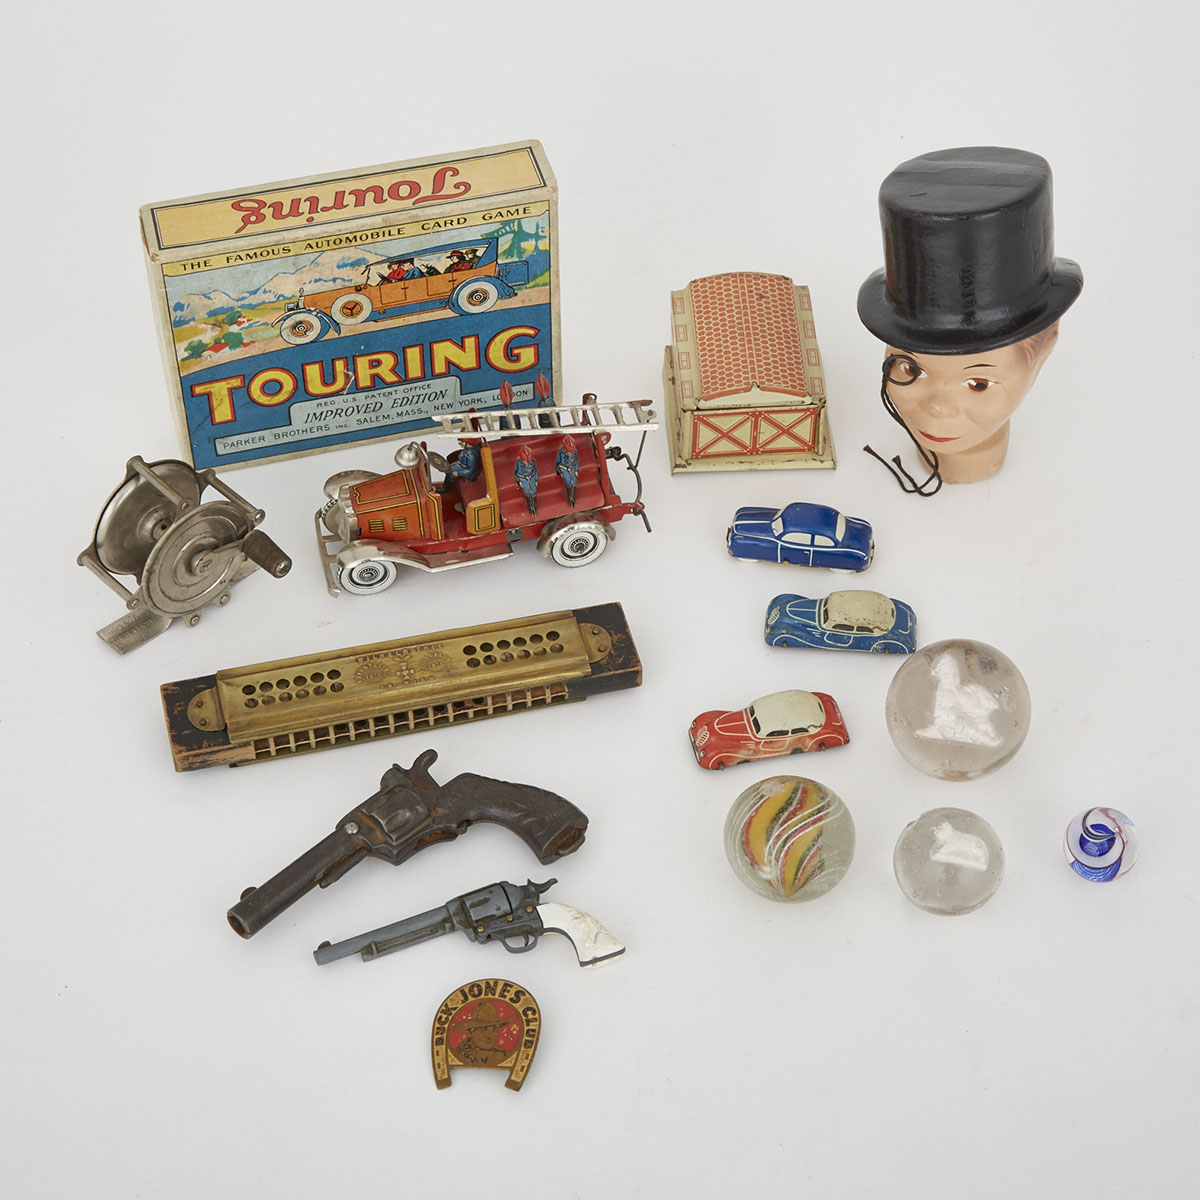 Miscellaneous Group of 16 Vintage Toys, 19th/early 20th century